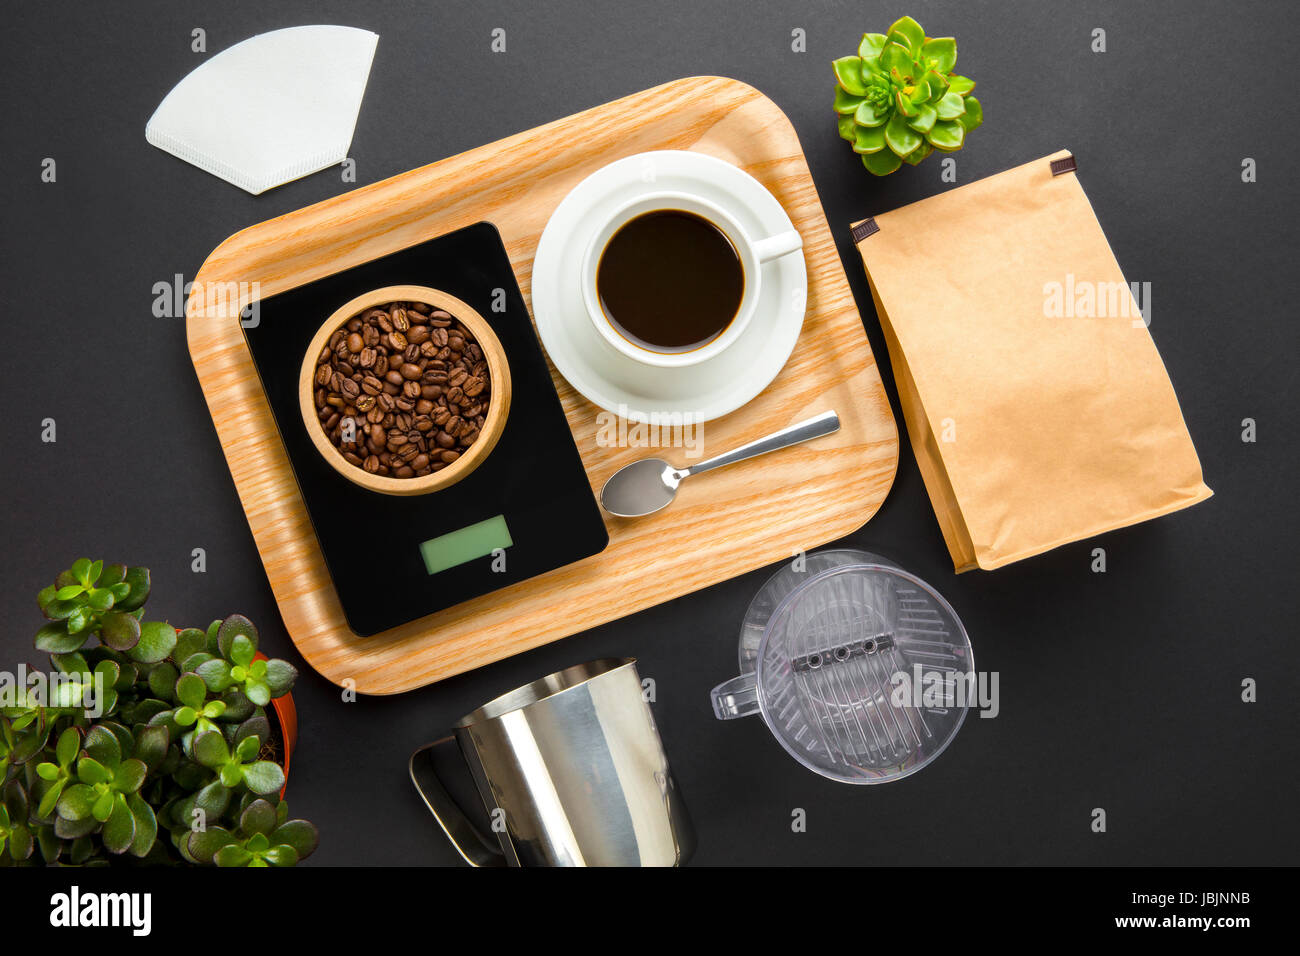 Eighteen Grams Roasted Coffee Beans Espresso Small Scale Display Stock  Photo by ©kris-ti-sirk.mail.ru 368192392